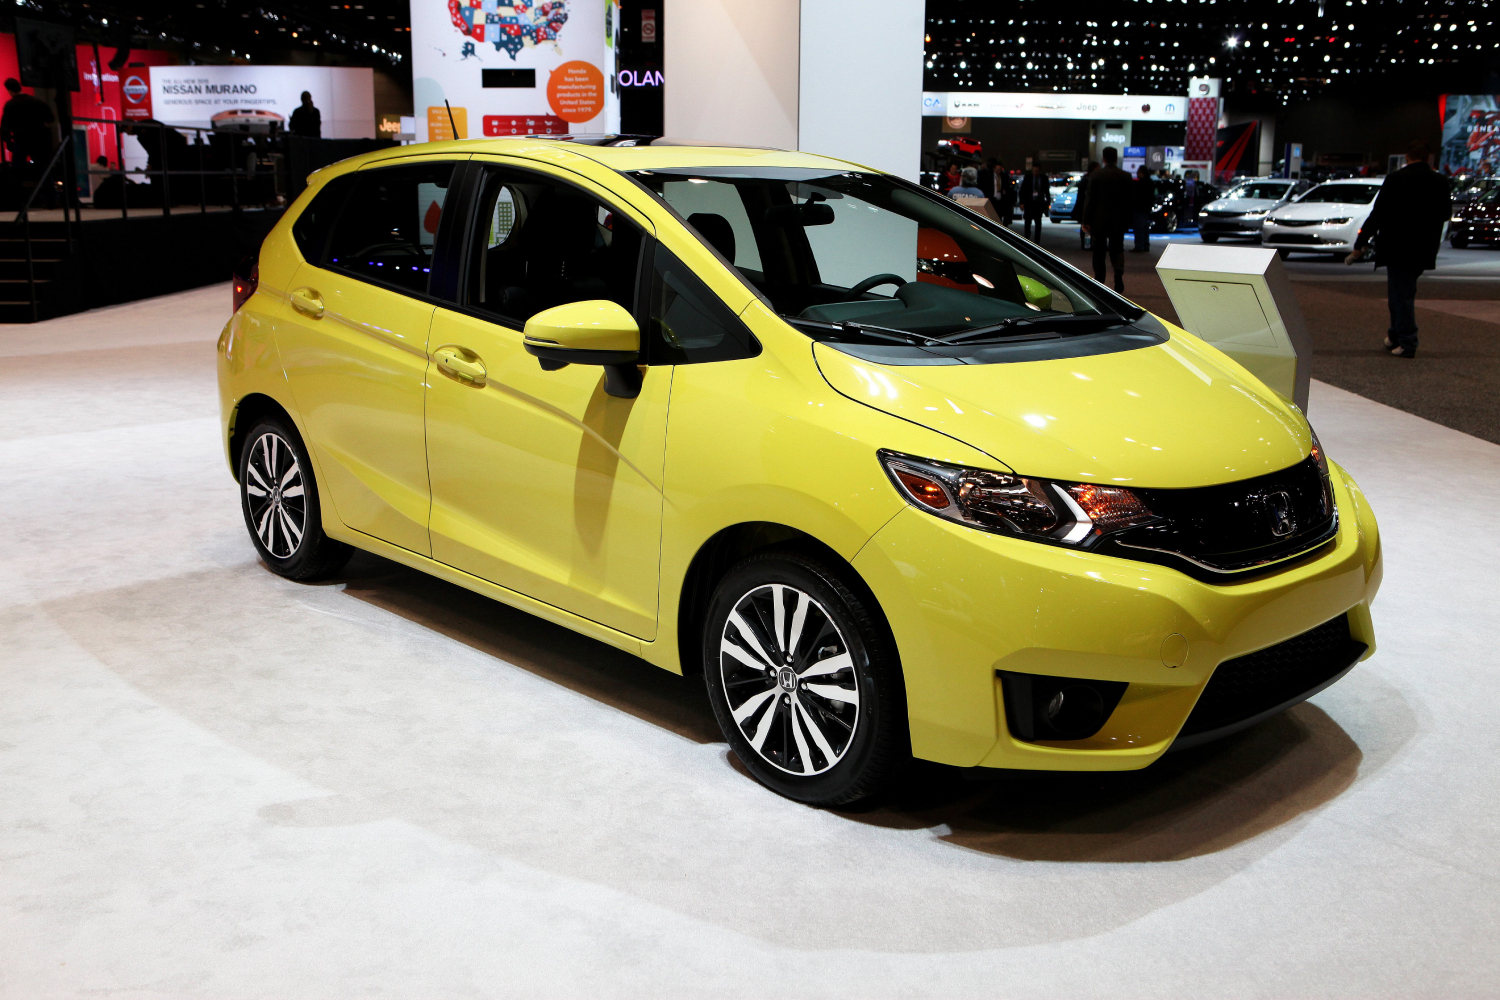 Carvana bought a 2015 Honda Fit for more than it was new